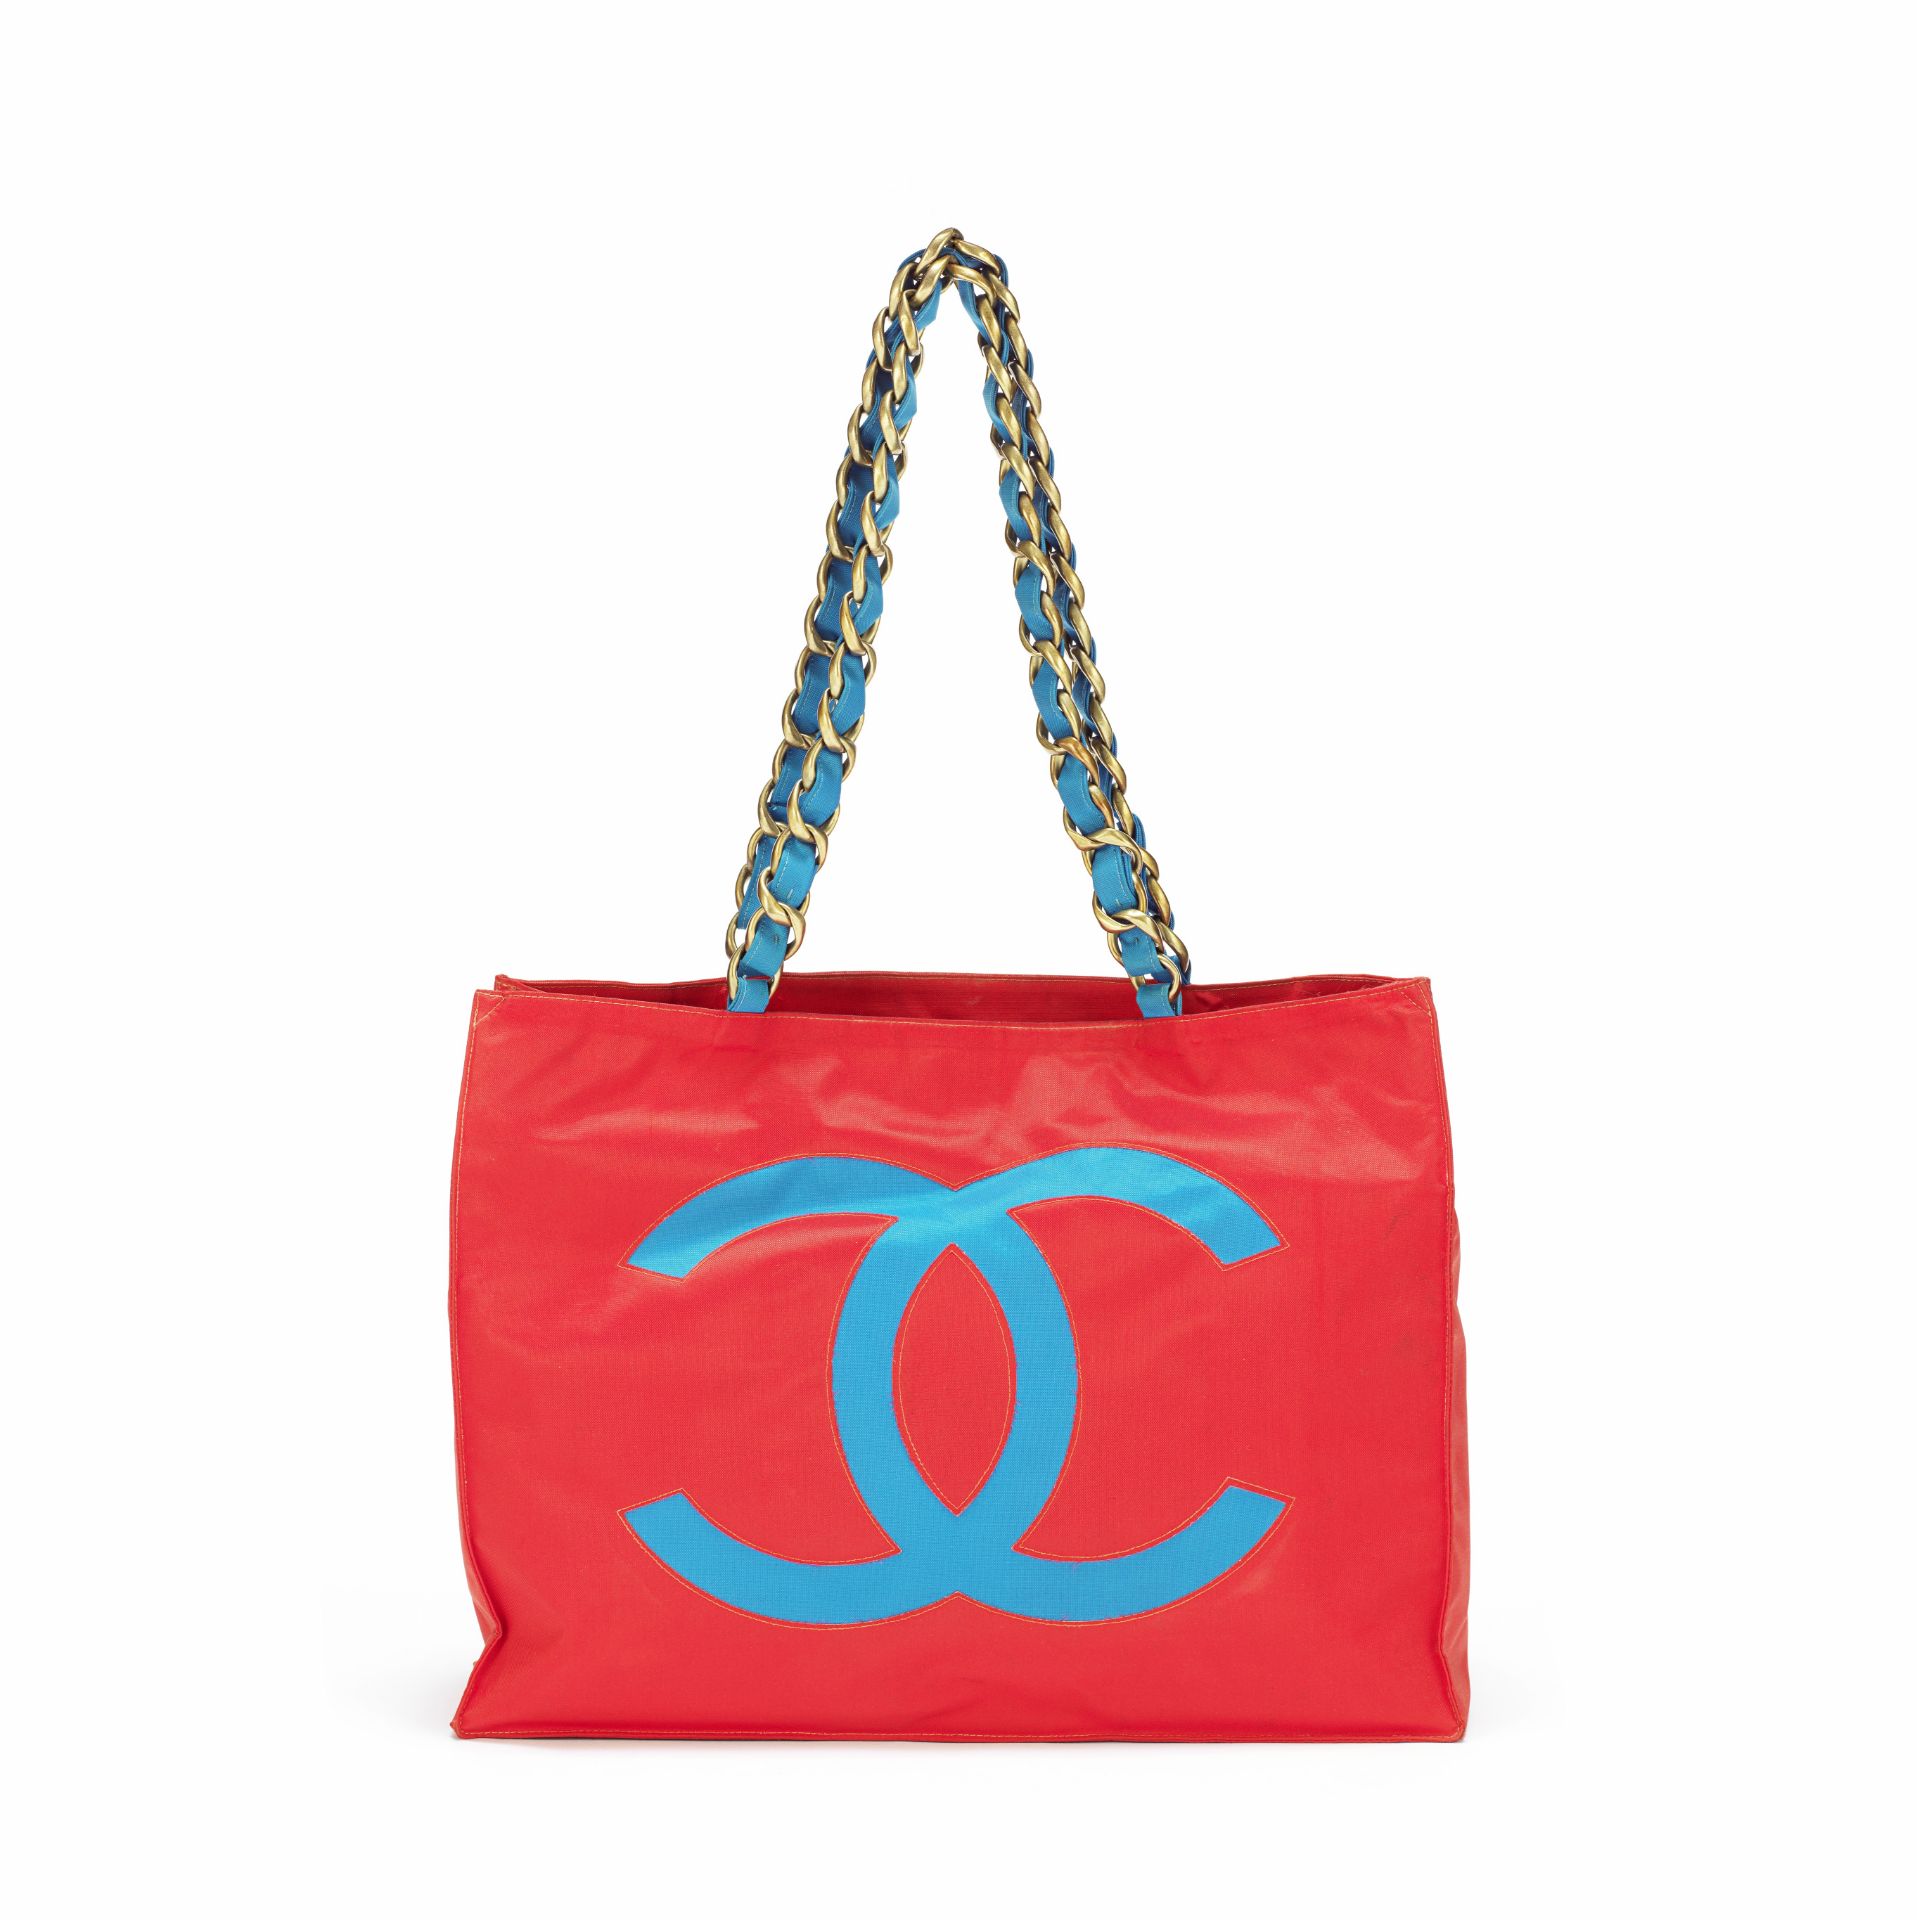 Red and Blue Canvas Shopper, Chanel, 1991-94, (Includes serial sticker and authenticity card)